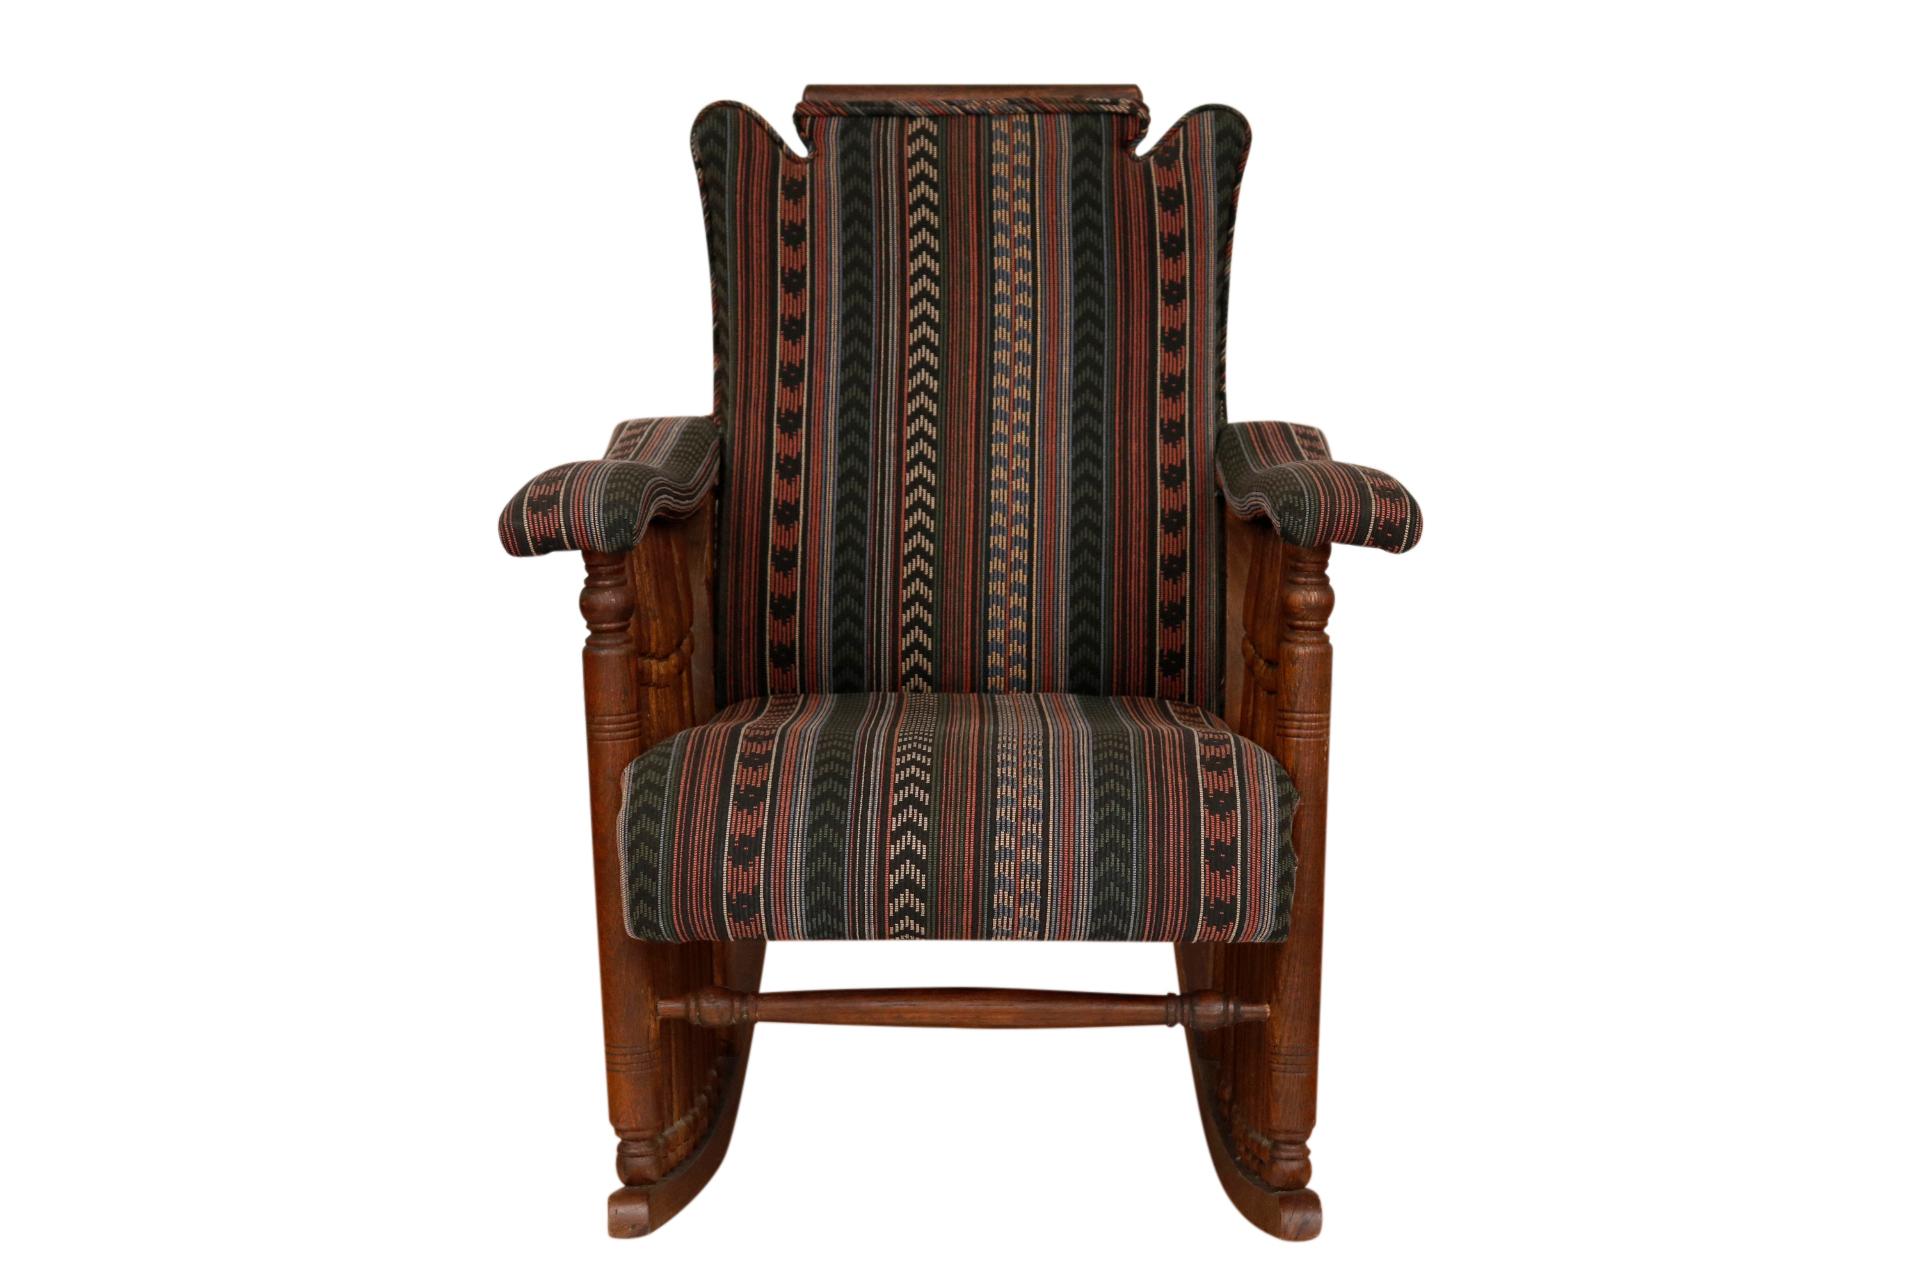 An early American “Brewster” style rocking chair with contoured arms supported with ten spindles on each side. The seat back is a solid panel with a flat crest rail, upholstered in a rich striped kilim fabric.